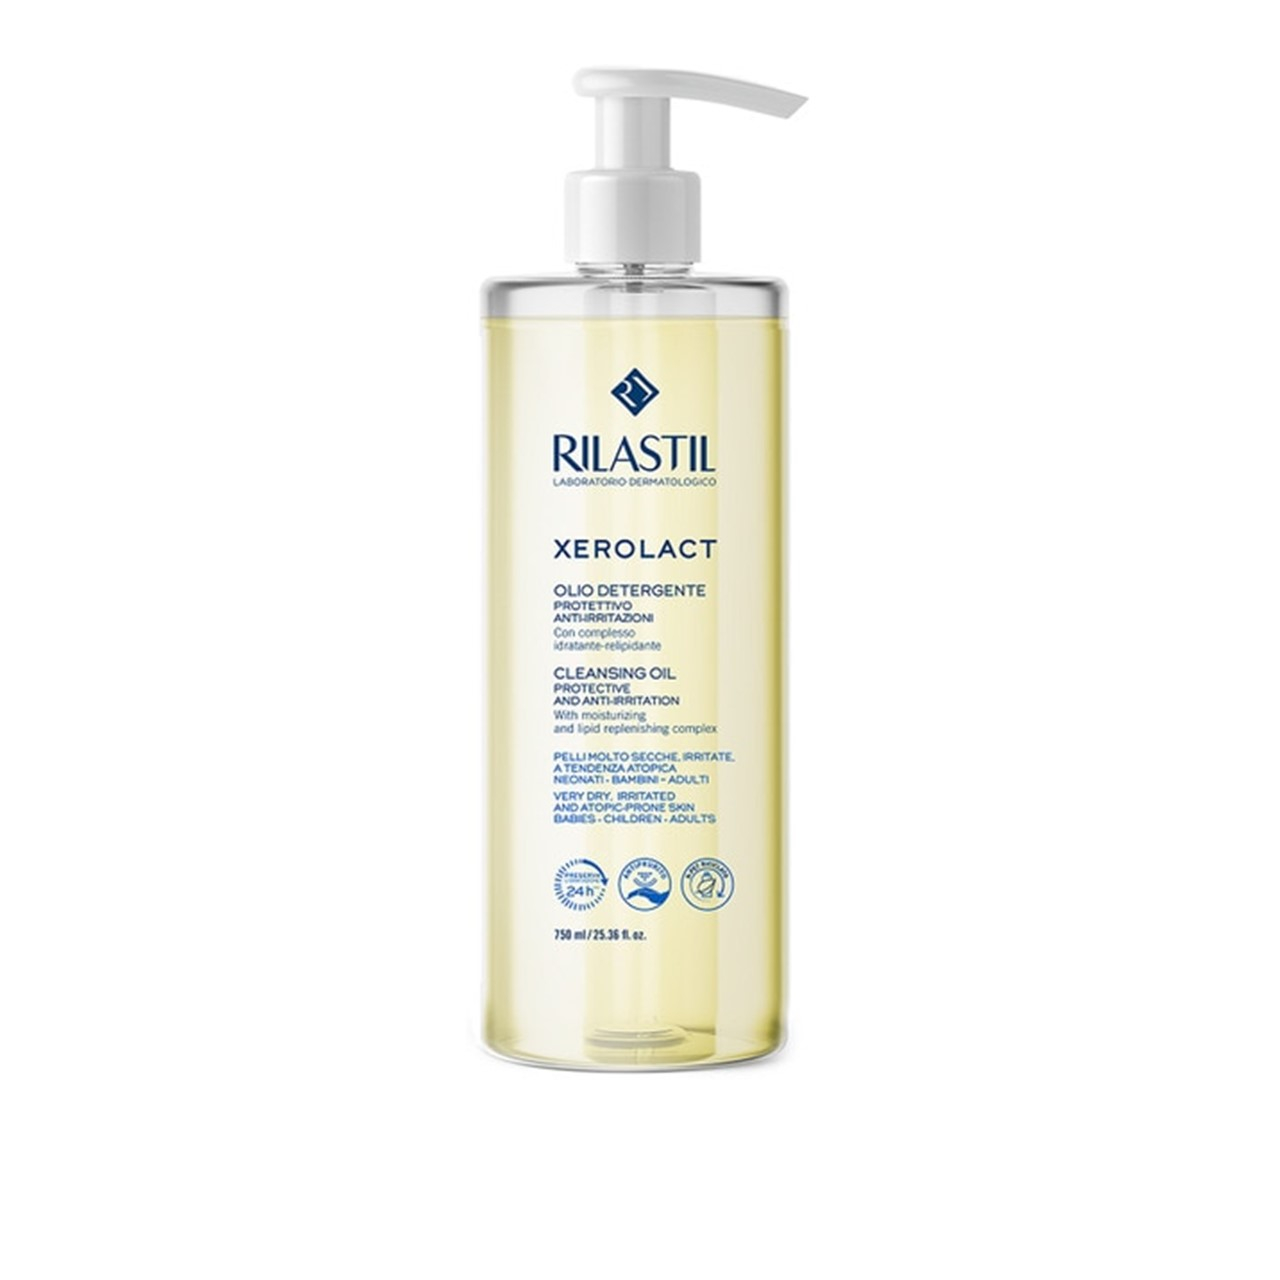 Acquista Rilastil Xerolact Cleansing Oil Protective and Anti